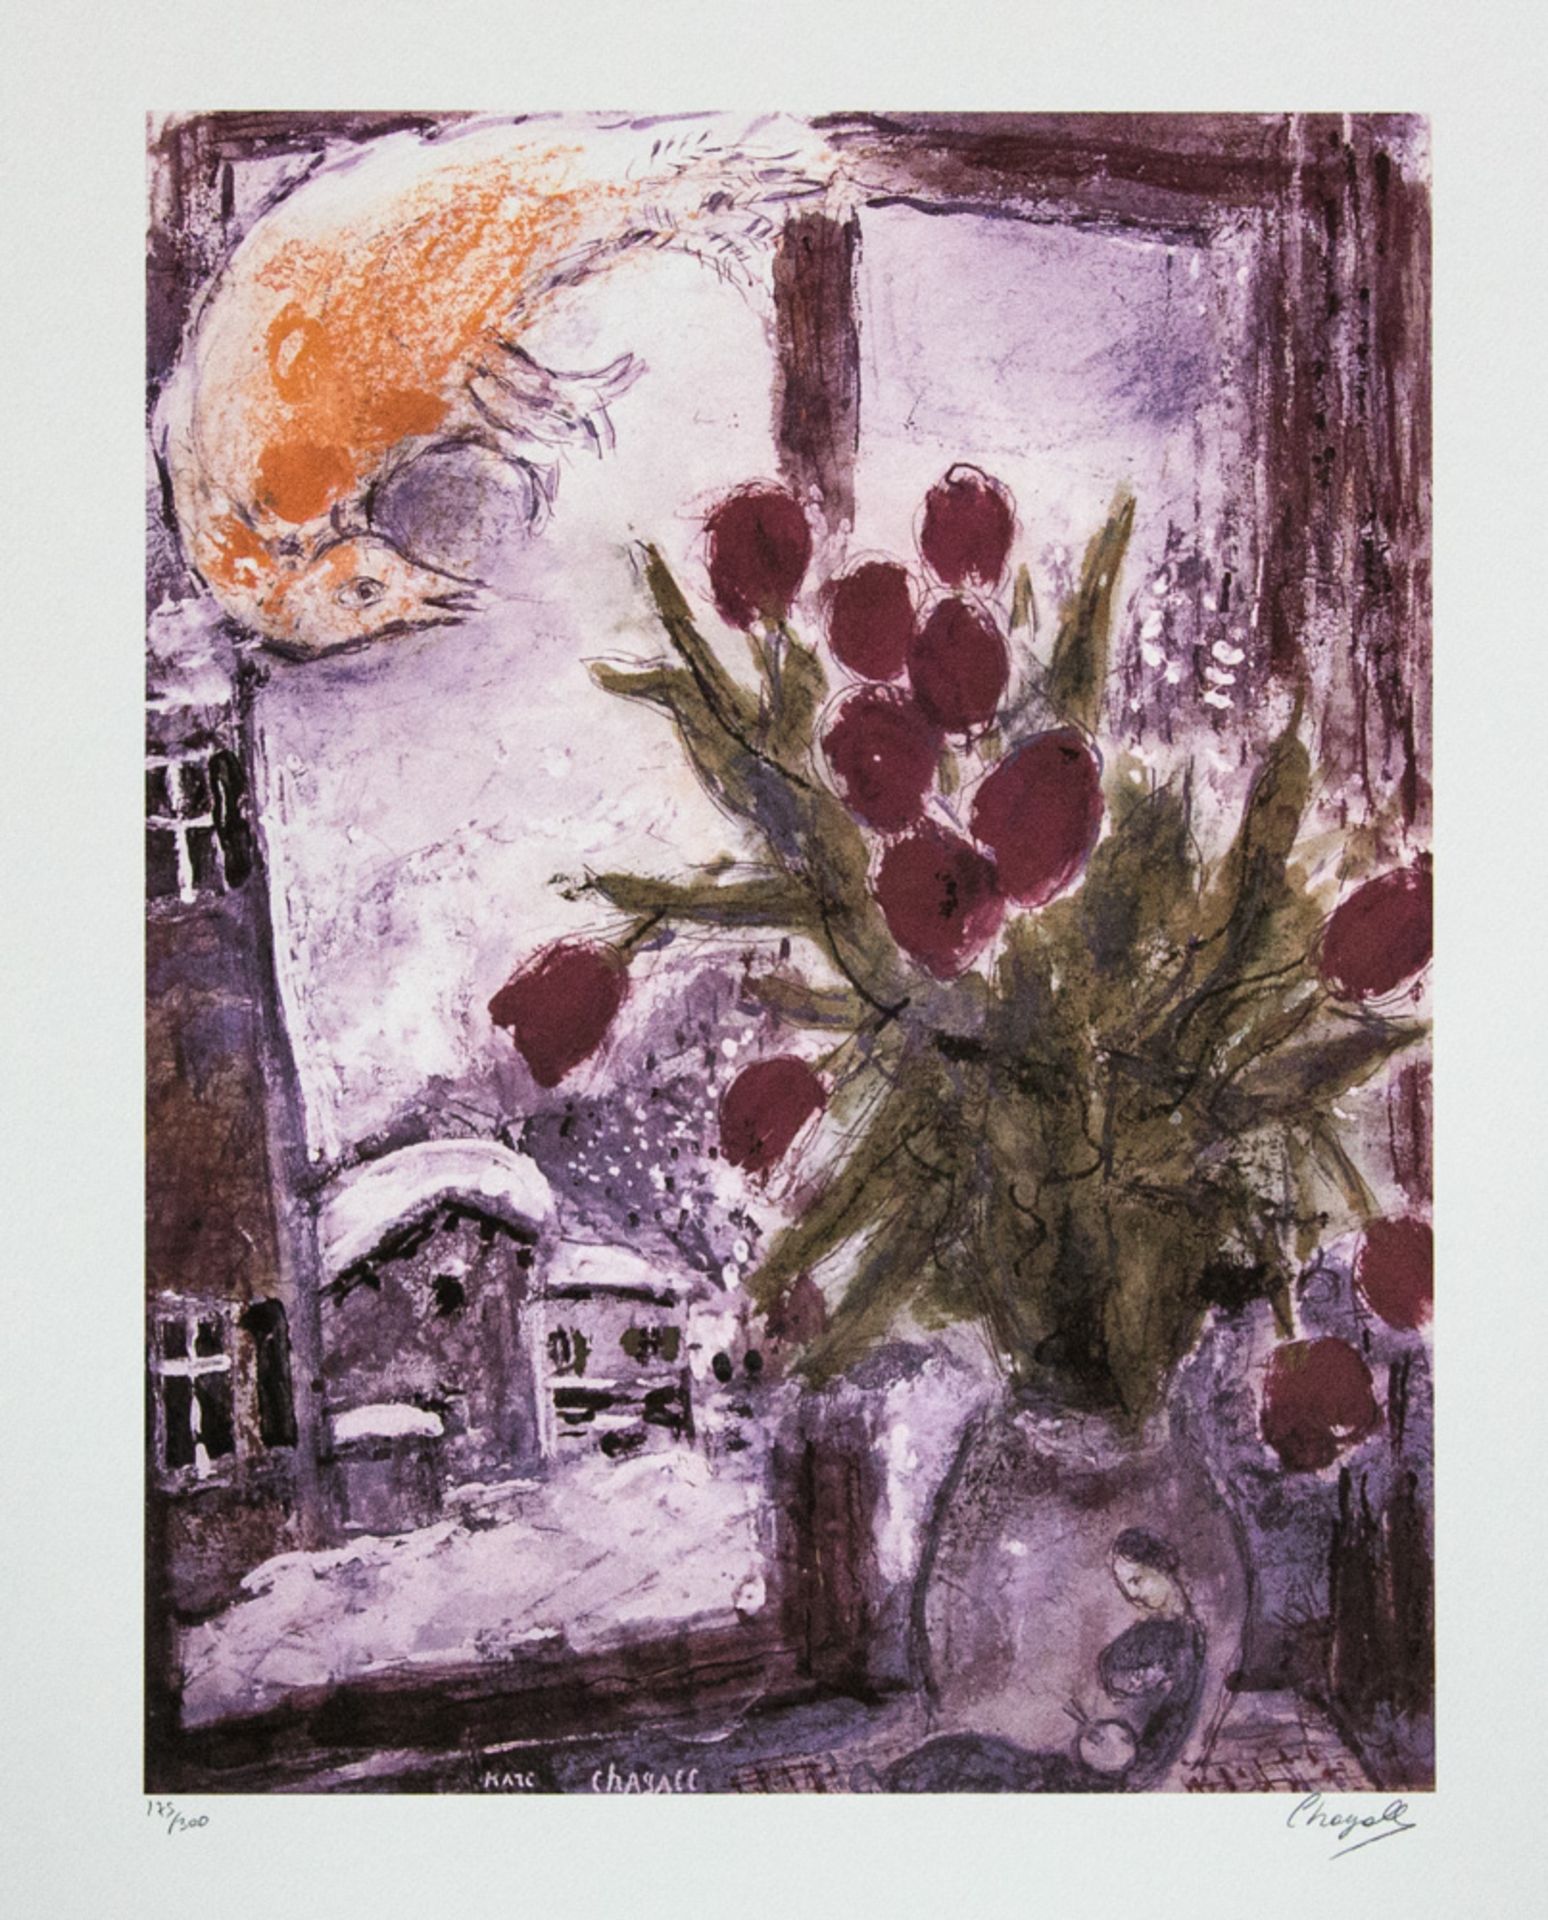 Marc Chagall 'Bouquet of Flowers'